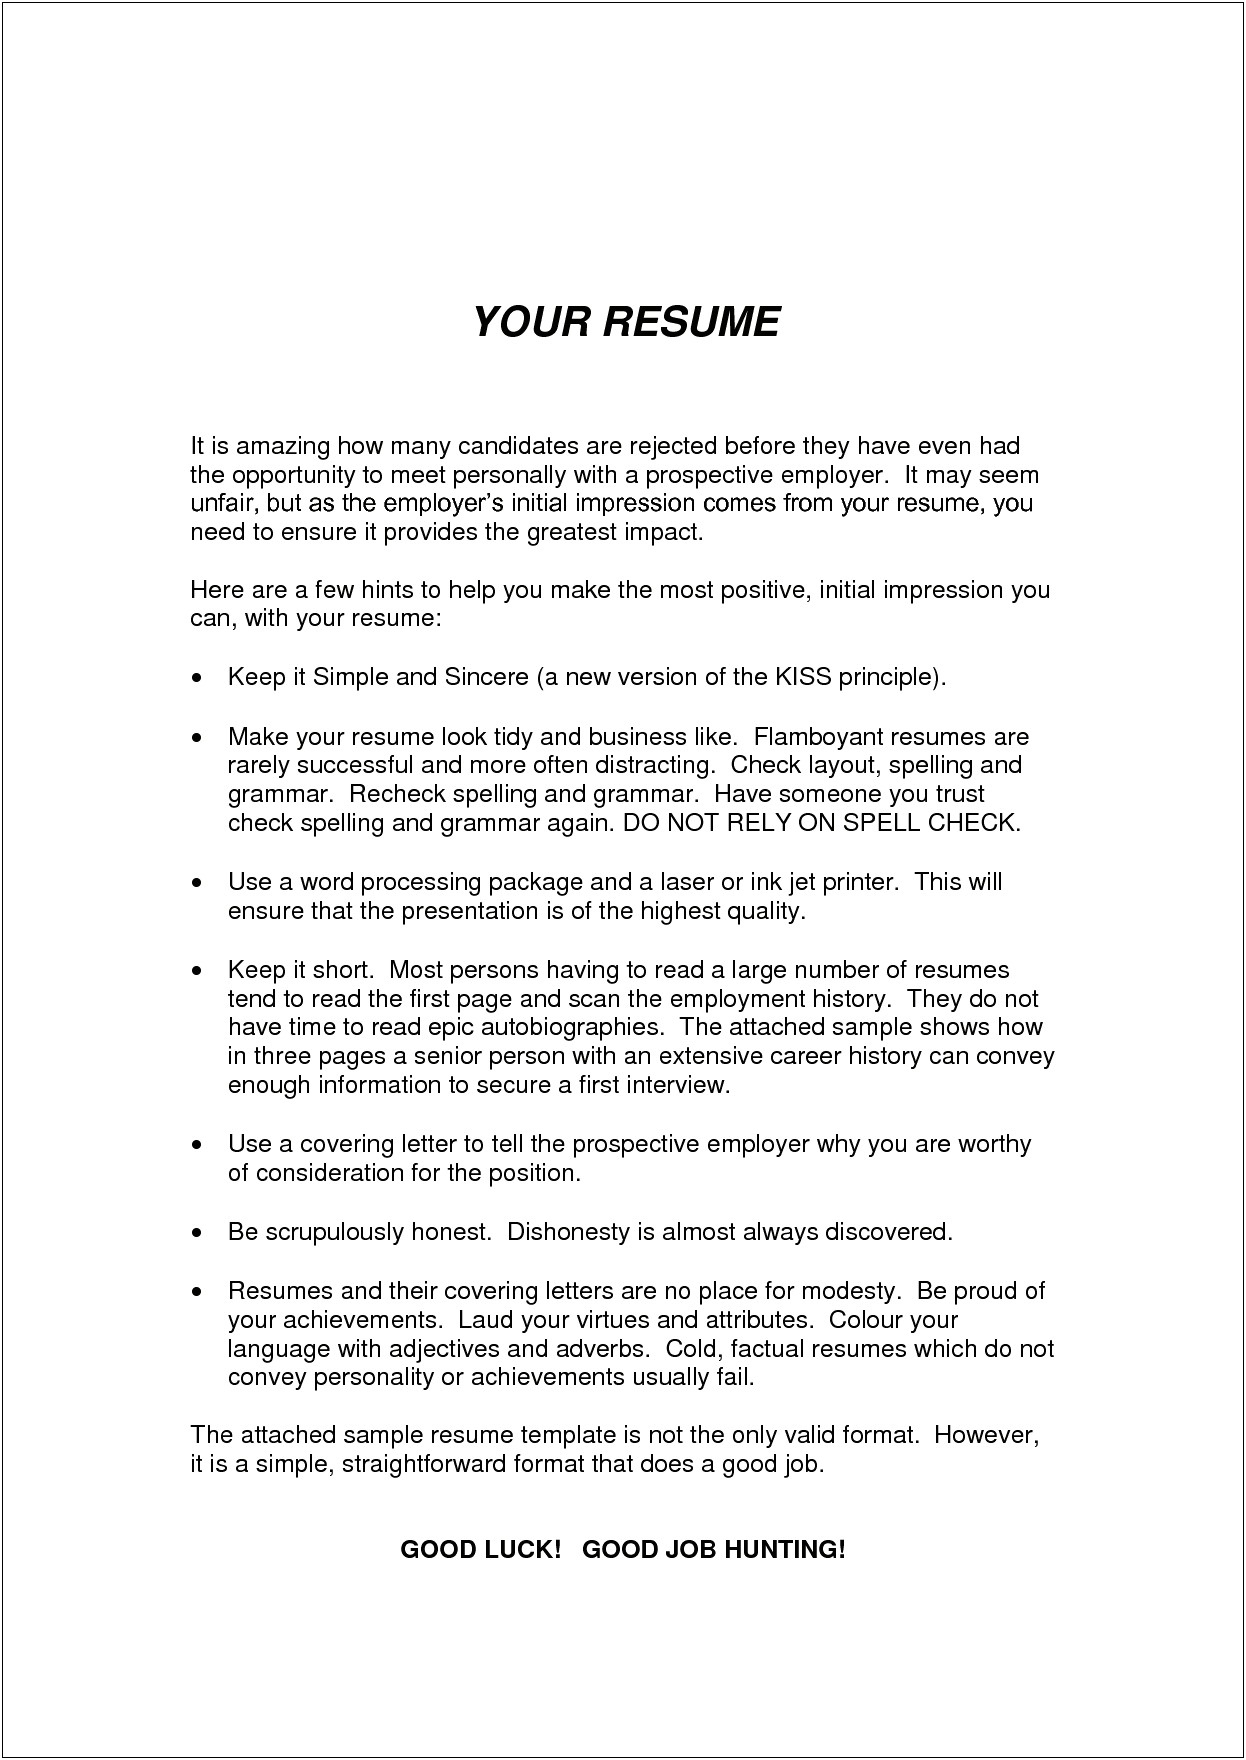 Resume Examples For People With Work Gaps